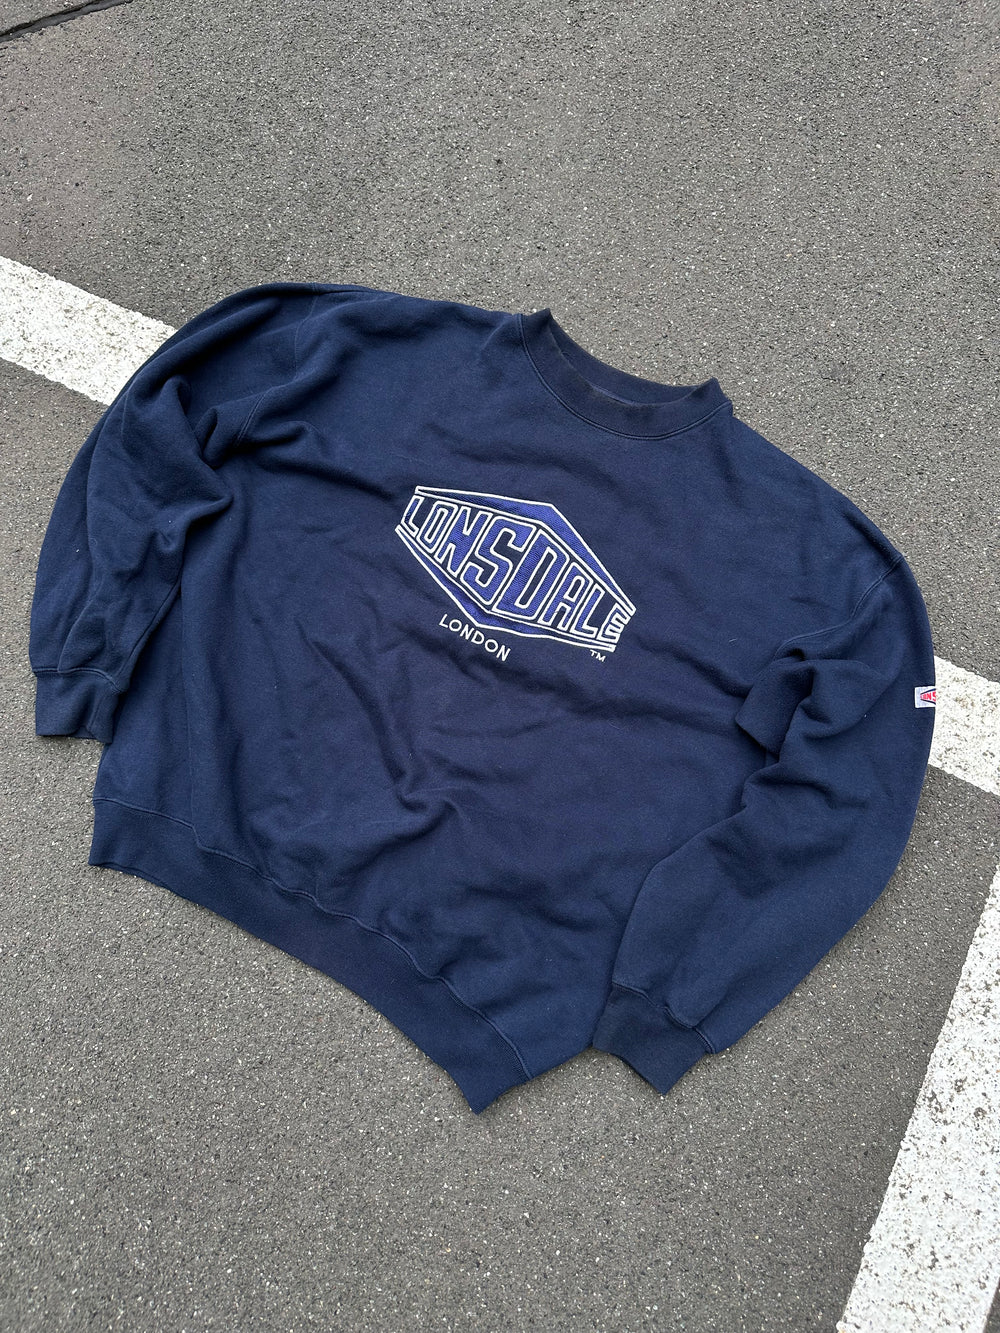 Early 2000s Lonsdale Embroidered Sweater (L)